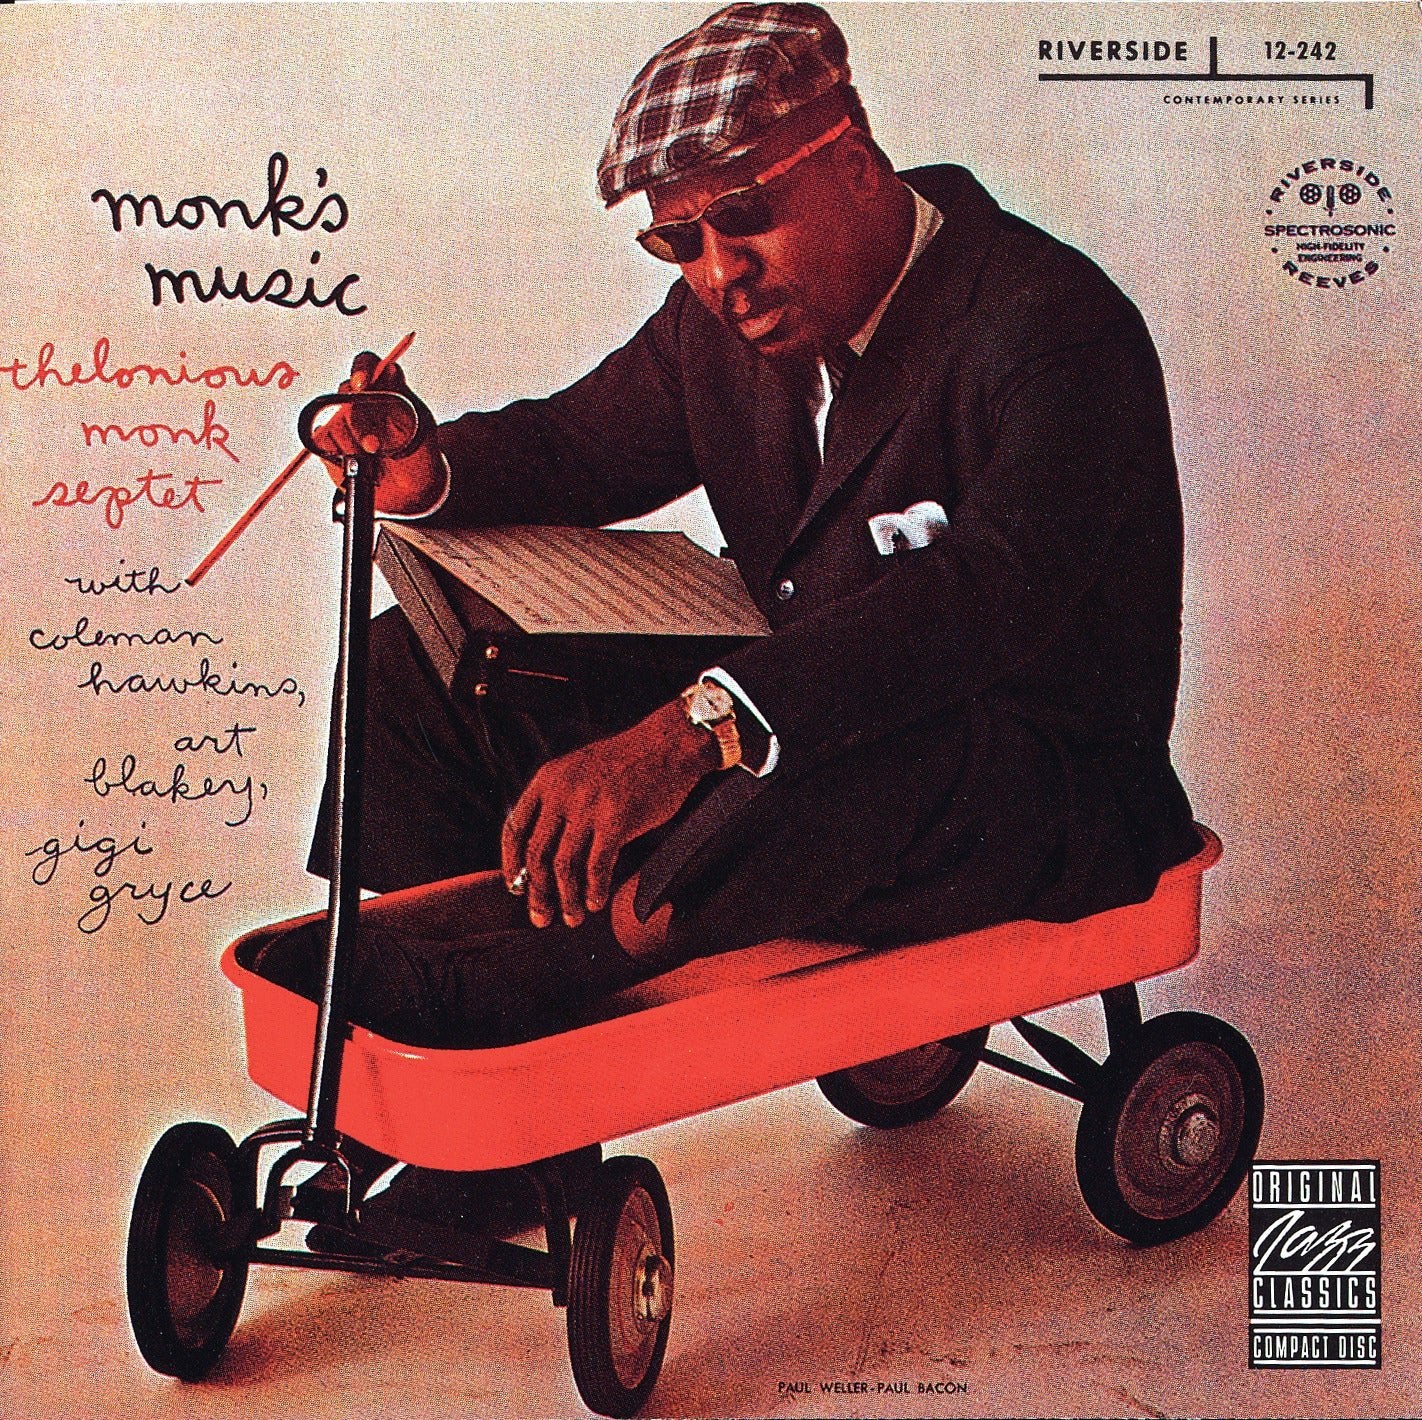 Thelonious Monk - Monk's Music - 33RPM